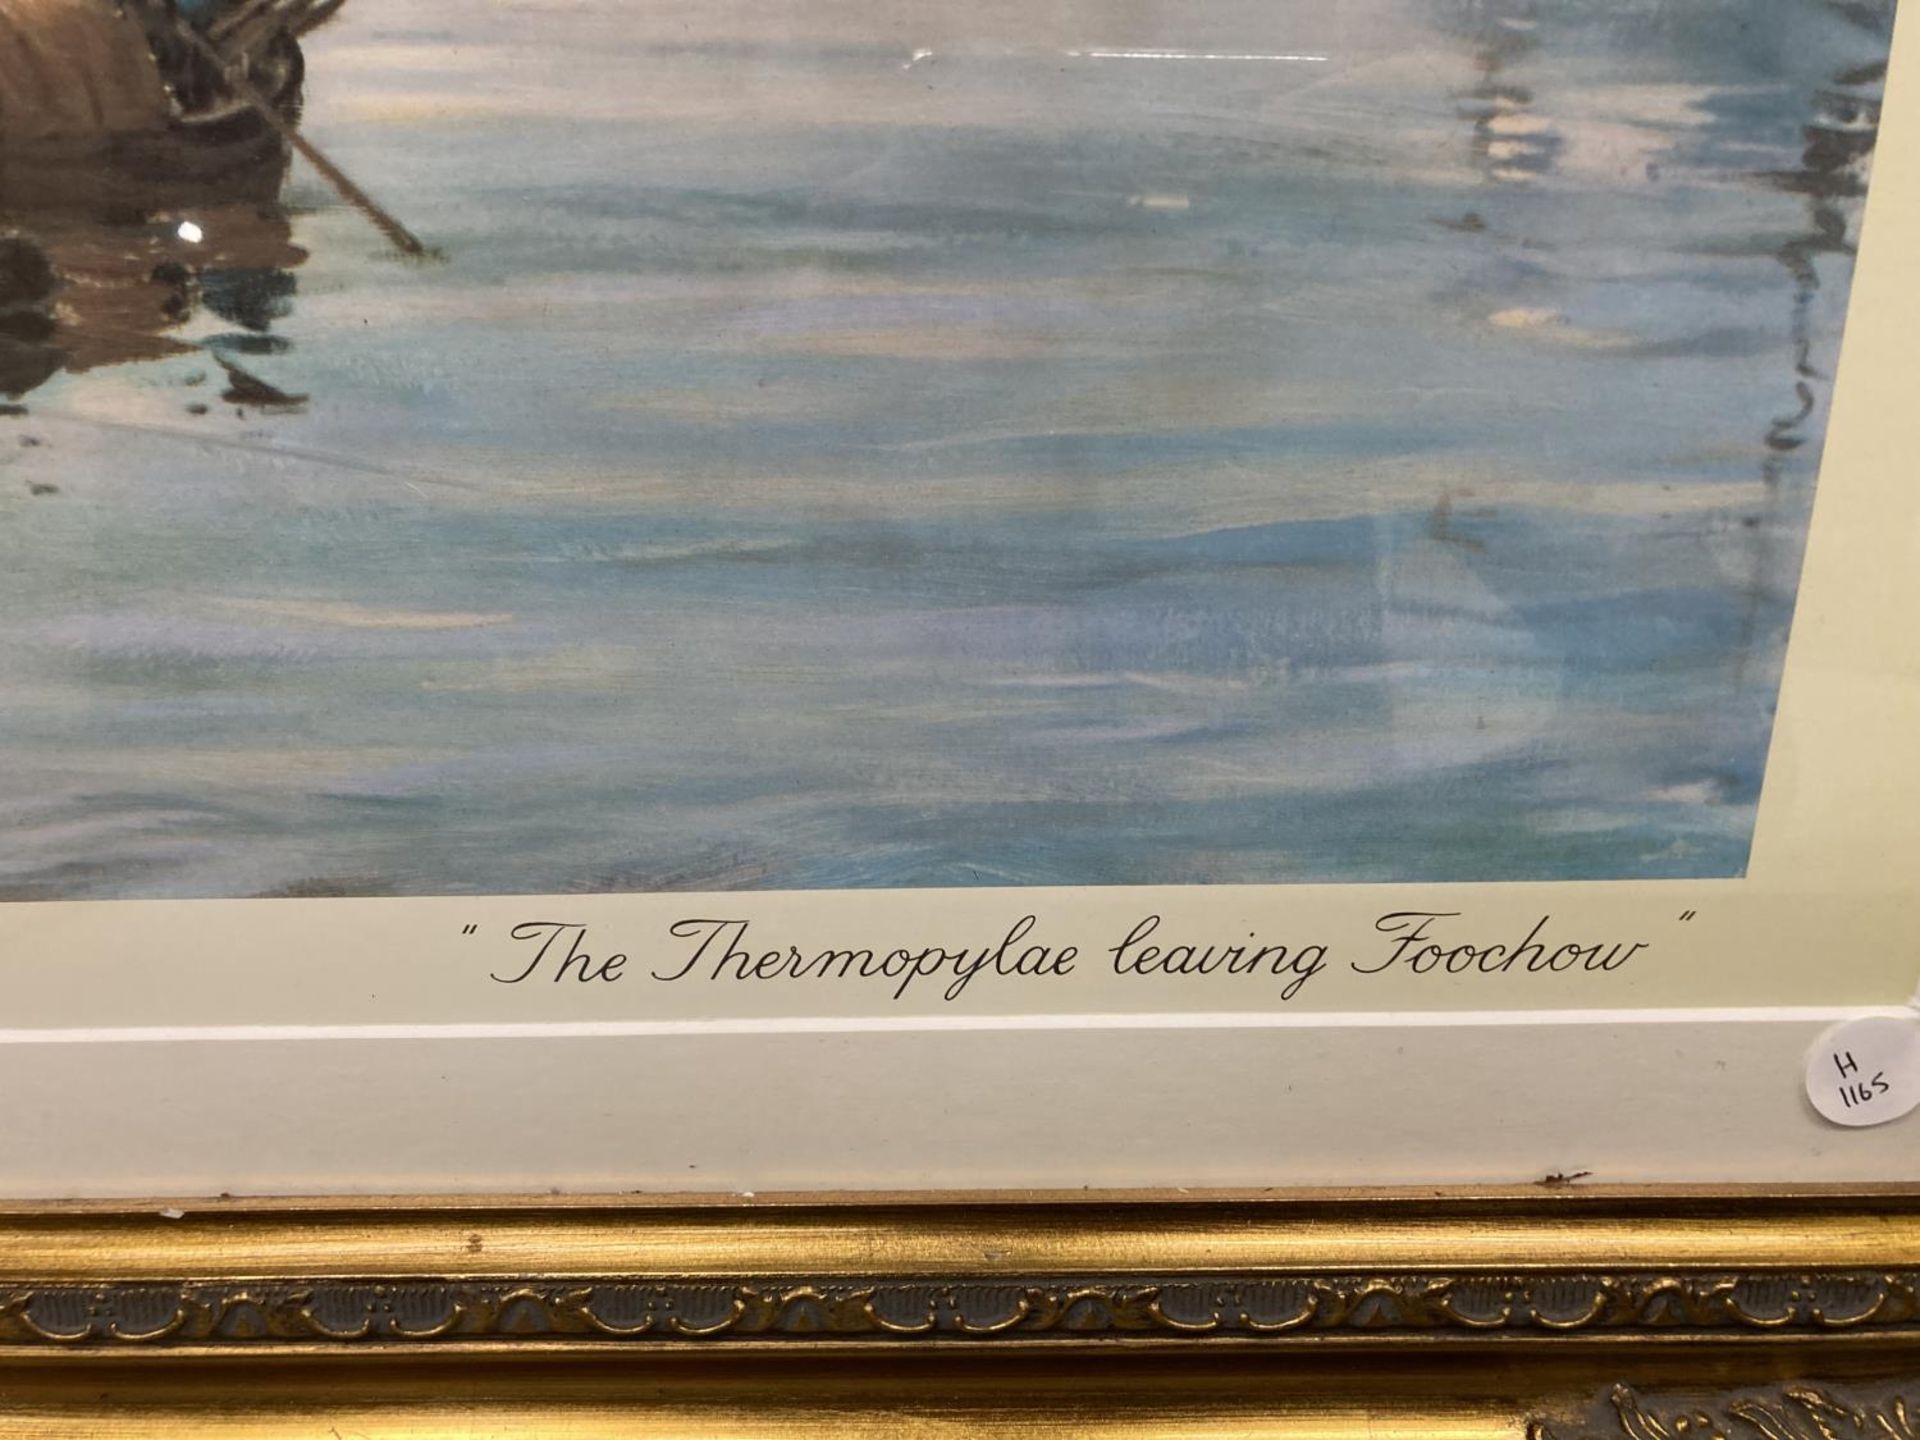 A LARGE ORNATE EMBOSSED GILT FRAMED PRINT OF THE THERMOPYLAE LEAVING FOOCHOW BY MONTAGUE DAWSON W: - Image 3 of 6